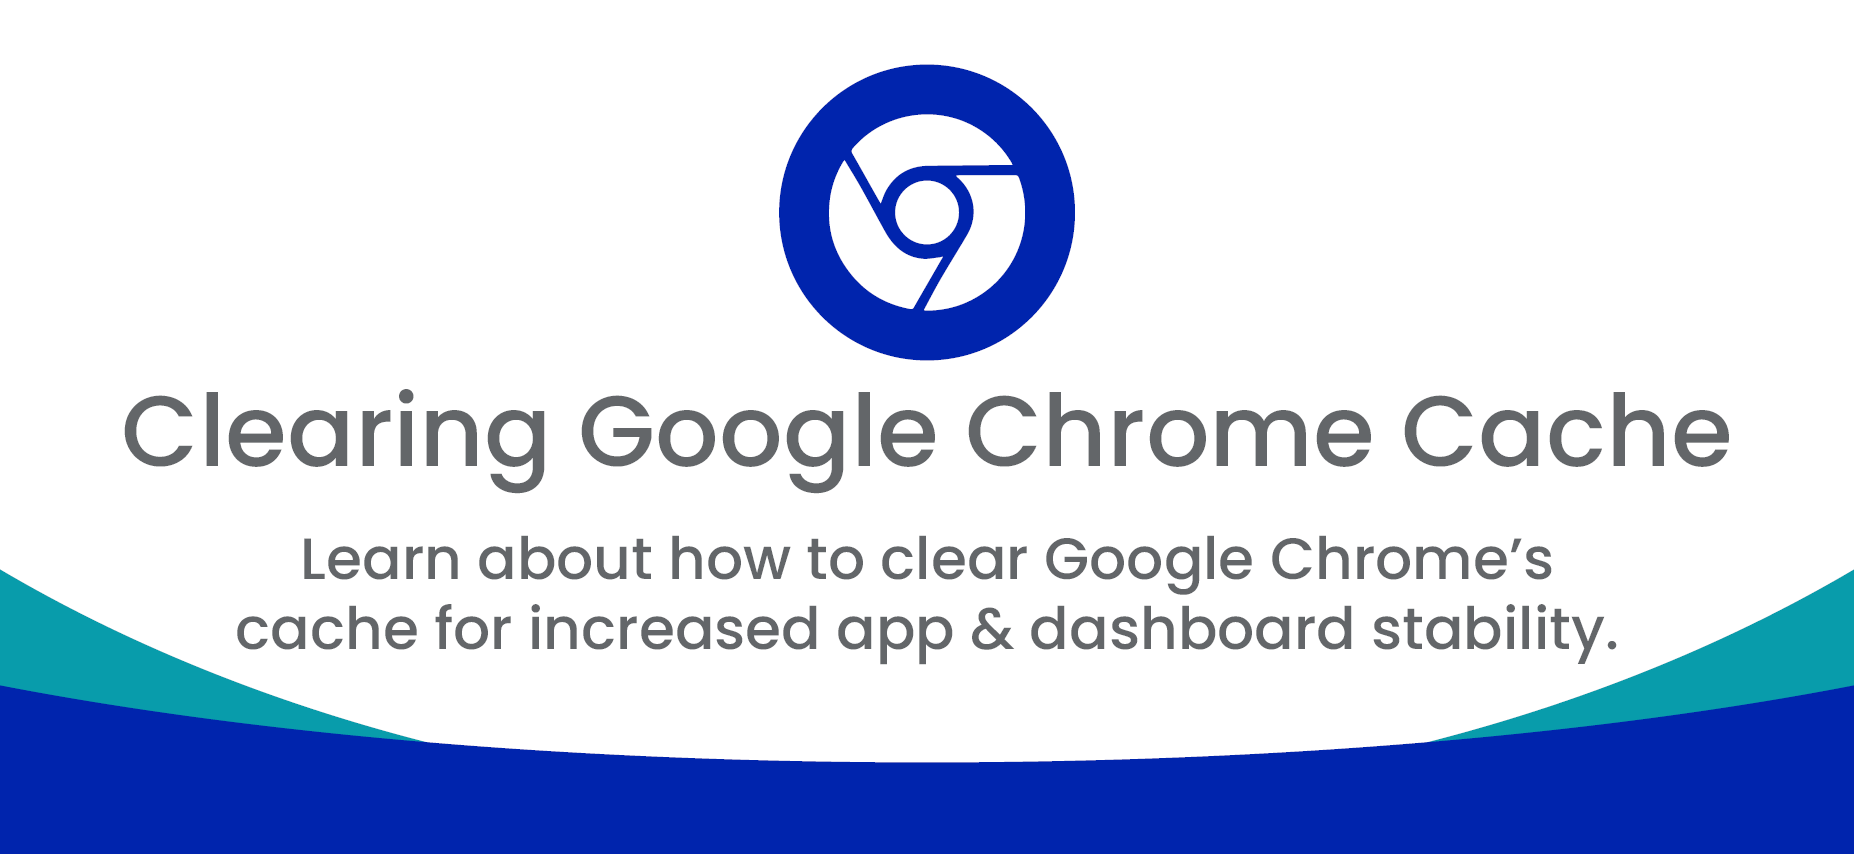 Clearing Google Chrome Cache